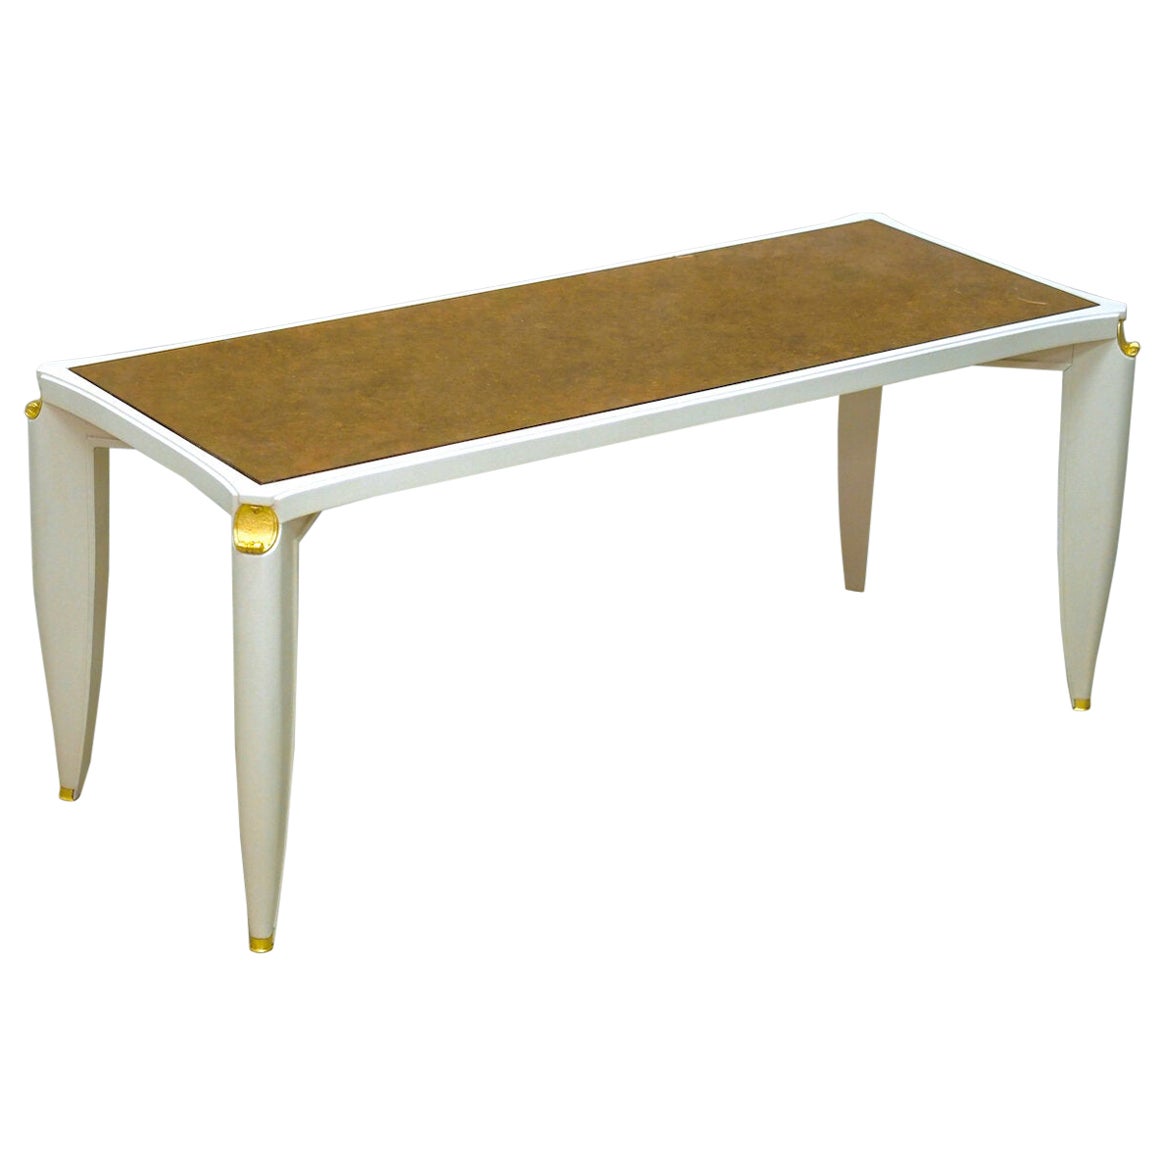 Maurice Jallot Lacquer and Verre Eglomise Coffee Table